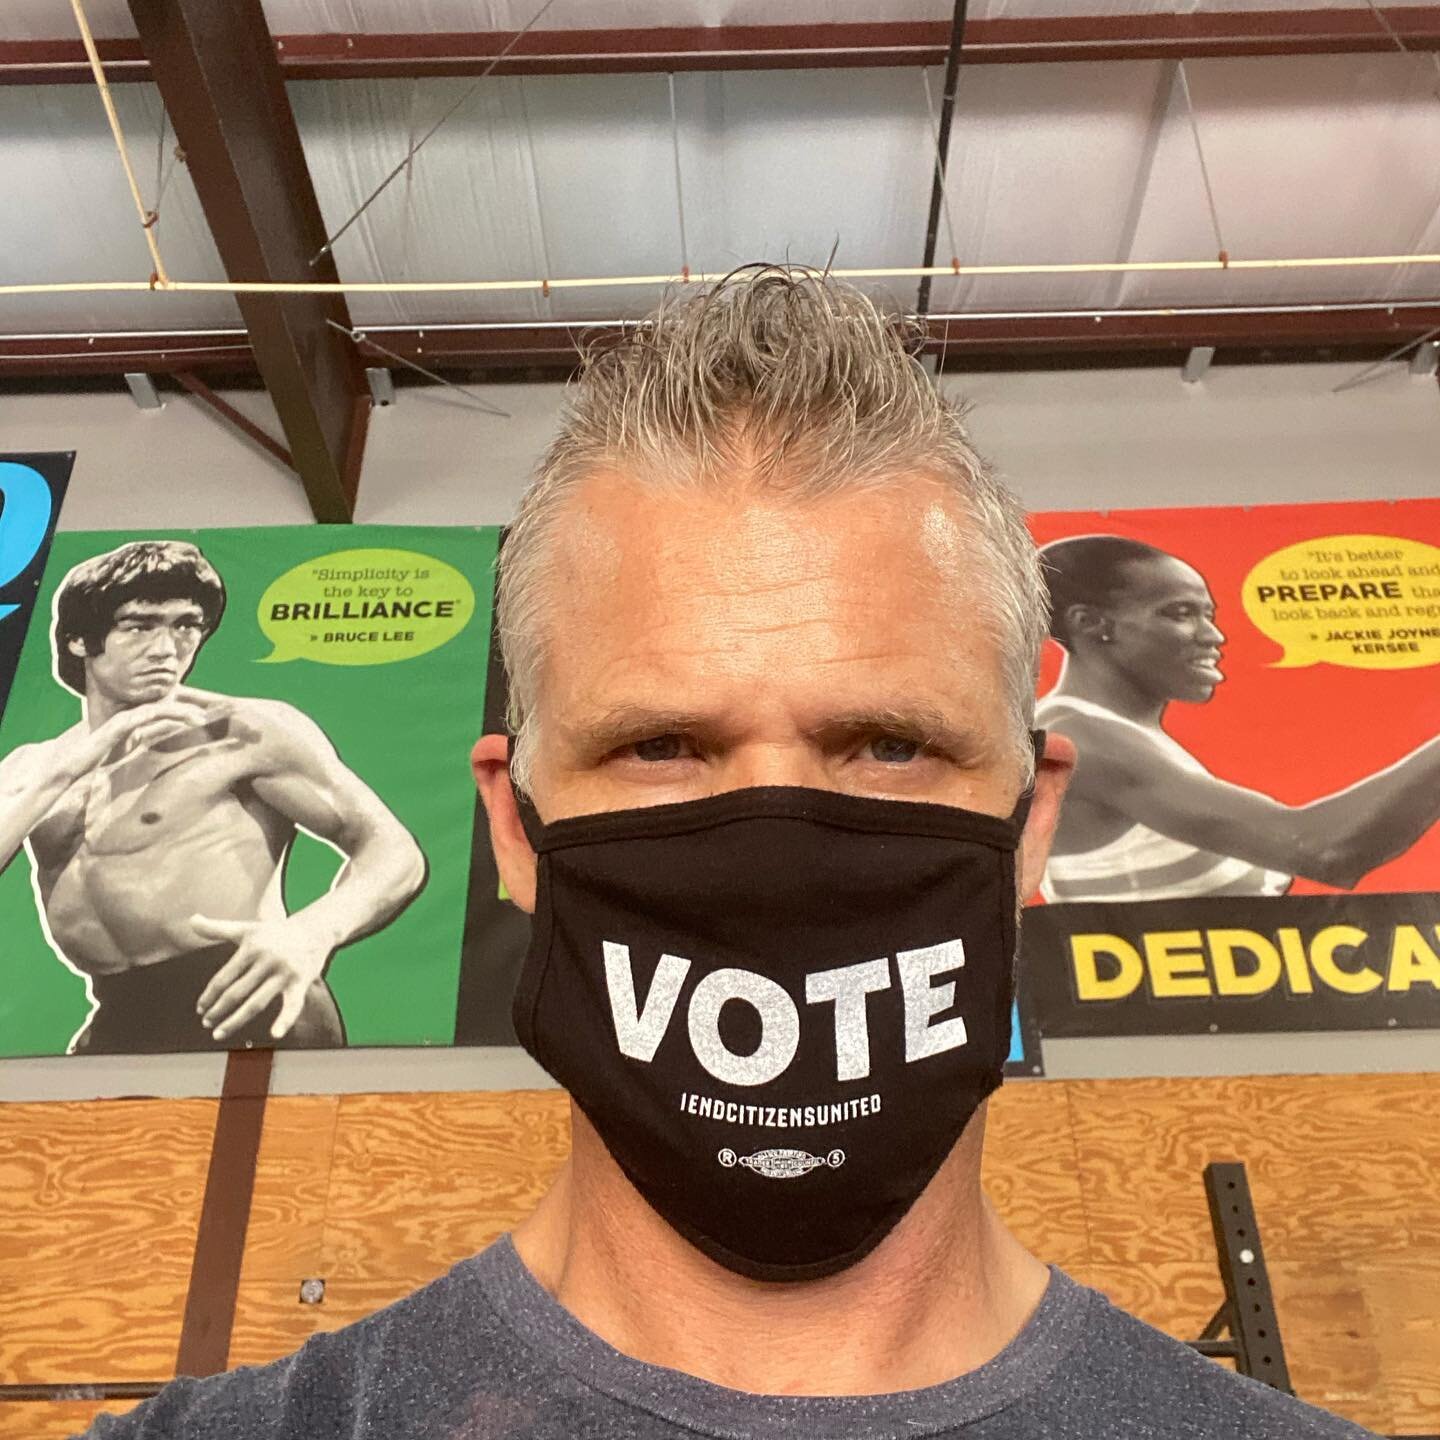 It&rsquo;s time. Early voting is open in South Carolina (aka absentee in person- whatever that&rsquo;s supposed to mean). Fitness is but one part of your life. Civic engagement is another. So let&rsquo;s go. Please inform yourself on more than just t